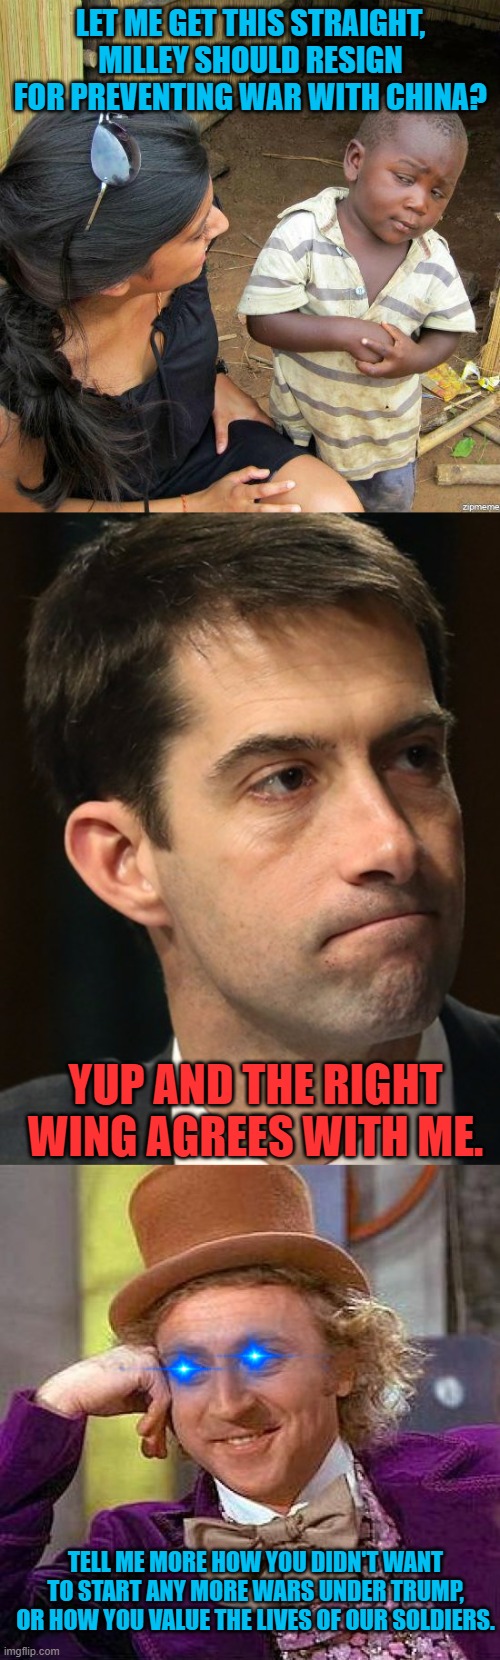 Stupid War Mongering Monkeys. | LET ME GET THIS STRAIGHT, MILLEY SHOULD RESIGN FOR PREVENTING WAR WITH CHINA? YUP AND THE RIGHT WING AGREES WITH ME. TELL ME MORE HOW YOU DIDN'T WANT TO START ANY MORE WARS UNDER TRUMP, OR HOW YOU VALUE THE LIVES OF OUR SOLDIERS. | image tagged in black kid,tom cotton clueless dickhead,memes,creepy condescending wonka | made w/ Imgflip meme maker